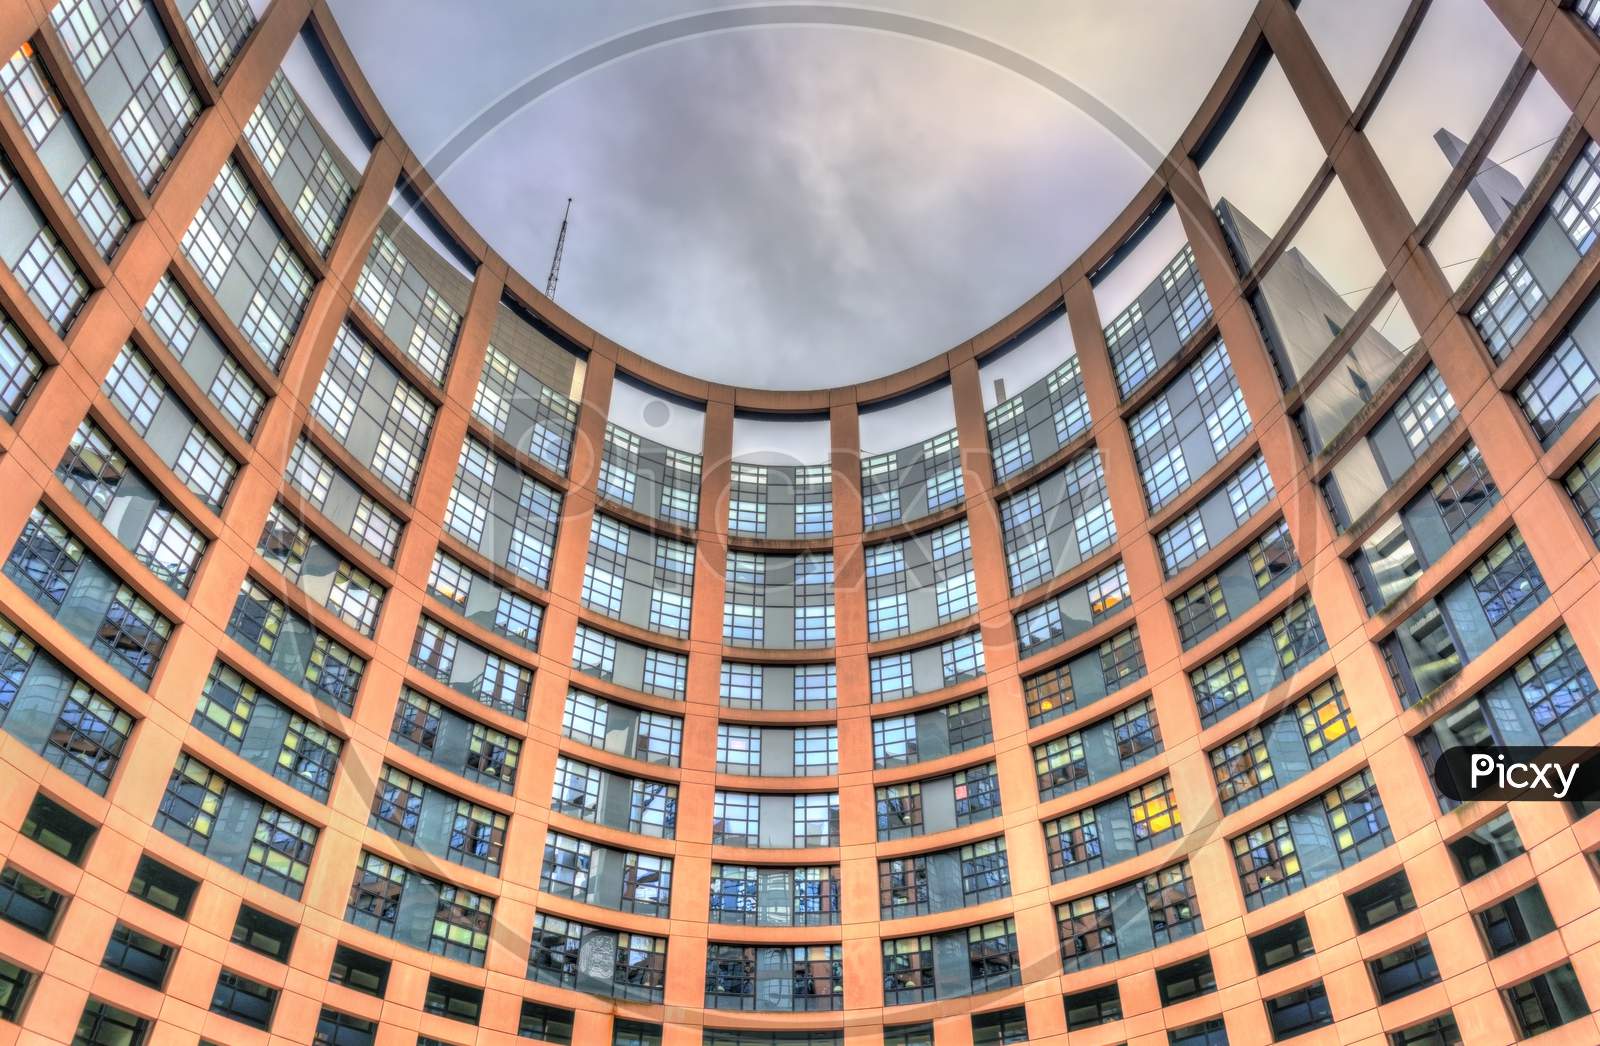 Inner Courtyard Of The European Parliament Building In Strasbourg, France